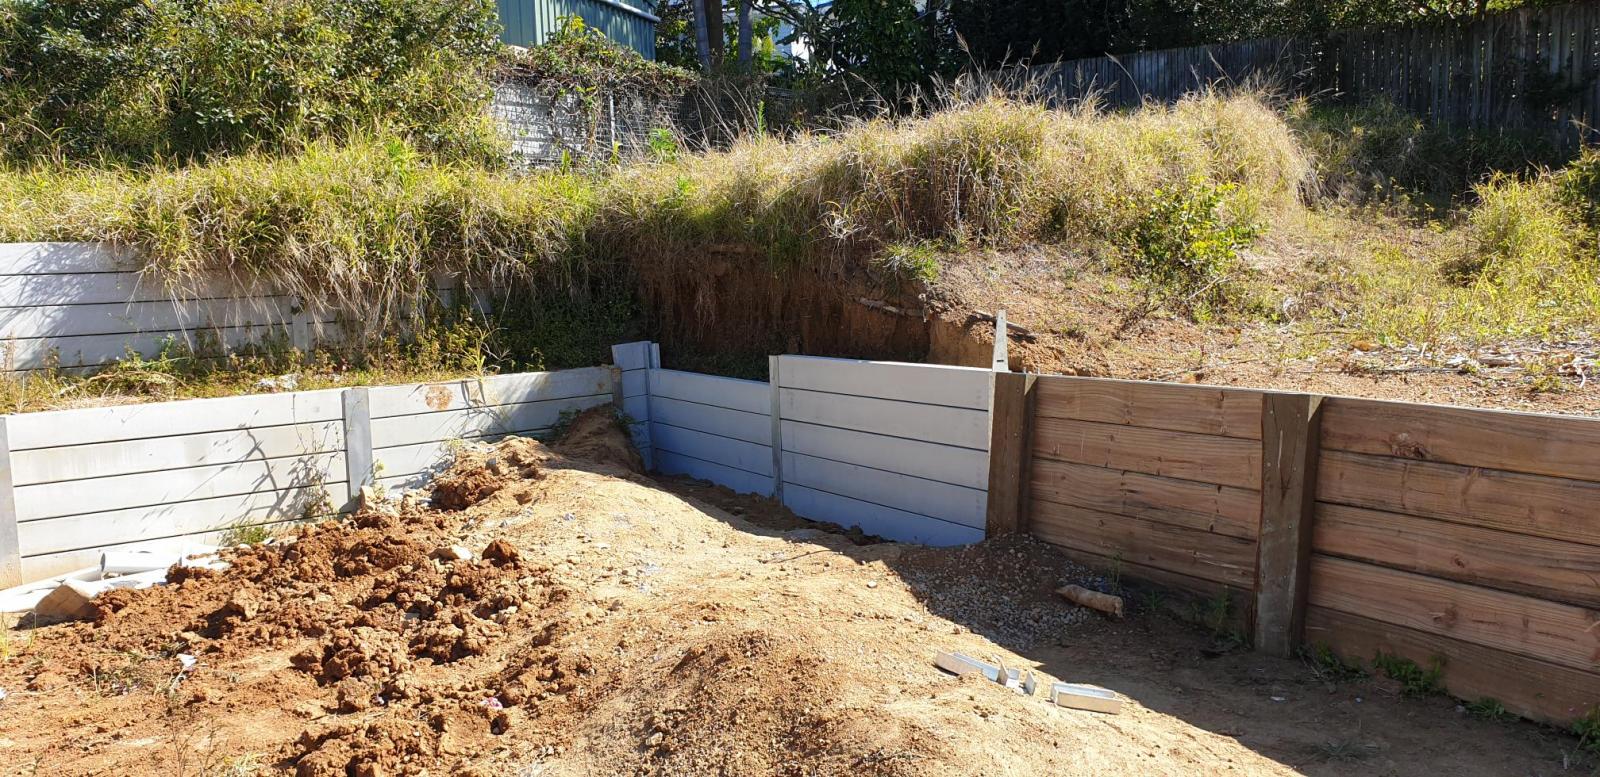 What do I do here? - Massive retaining wall issue